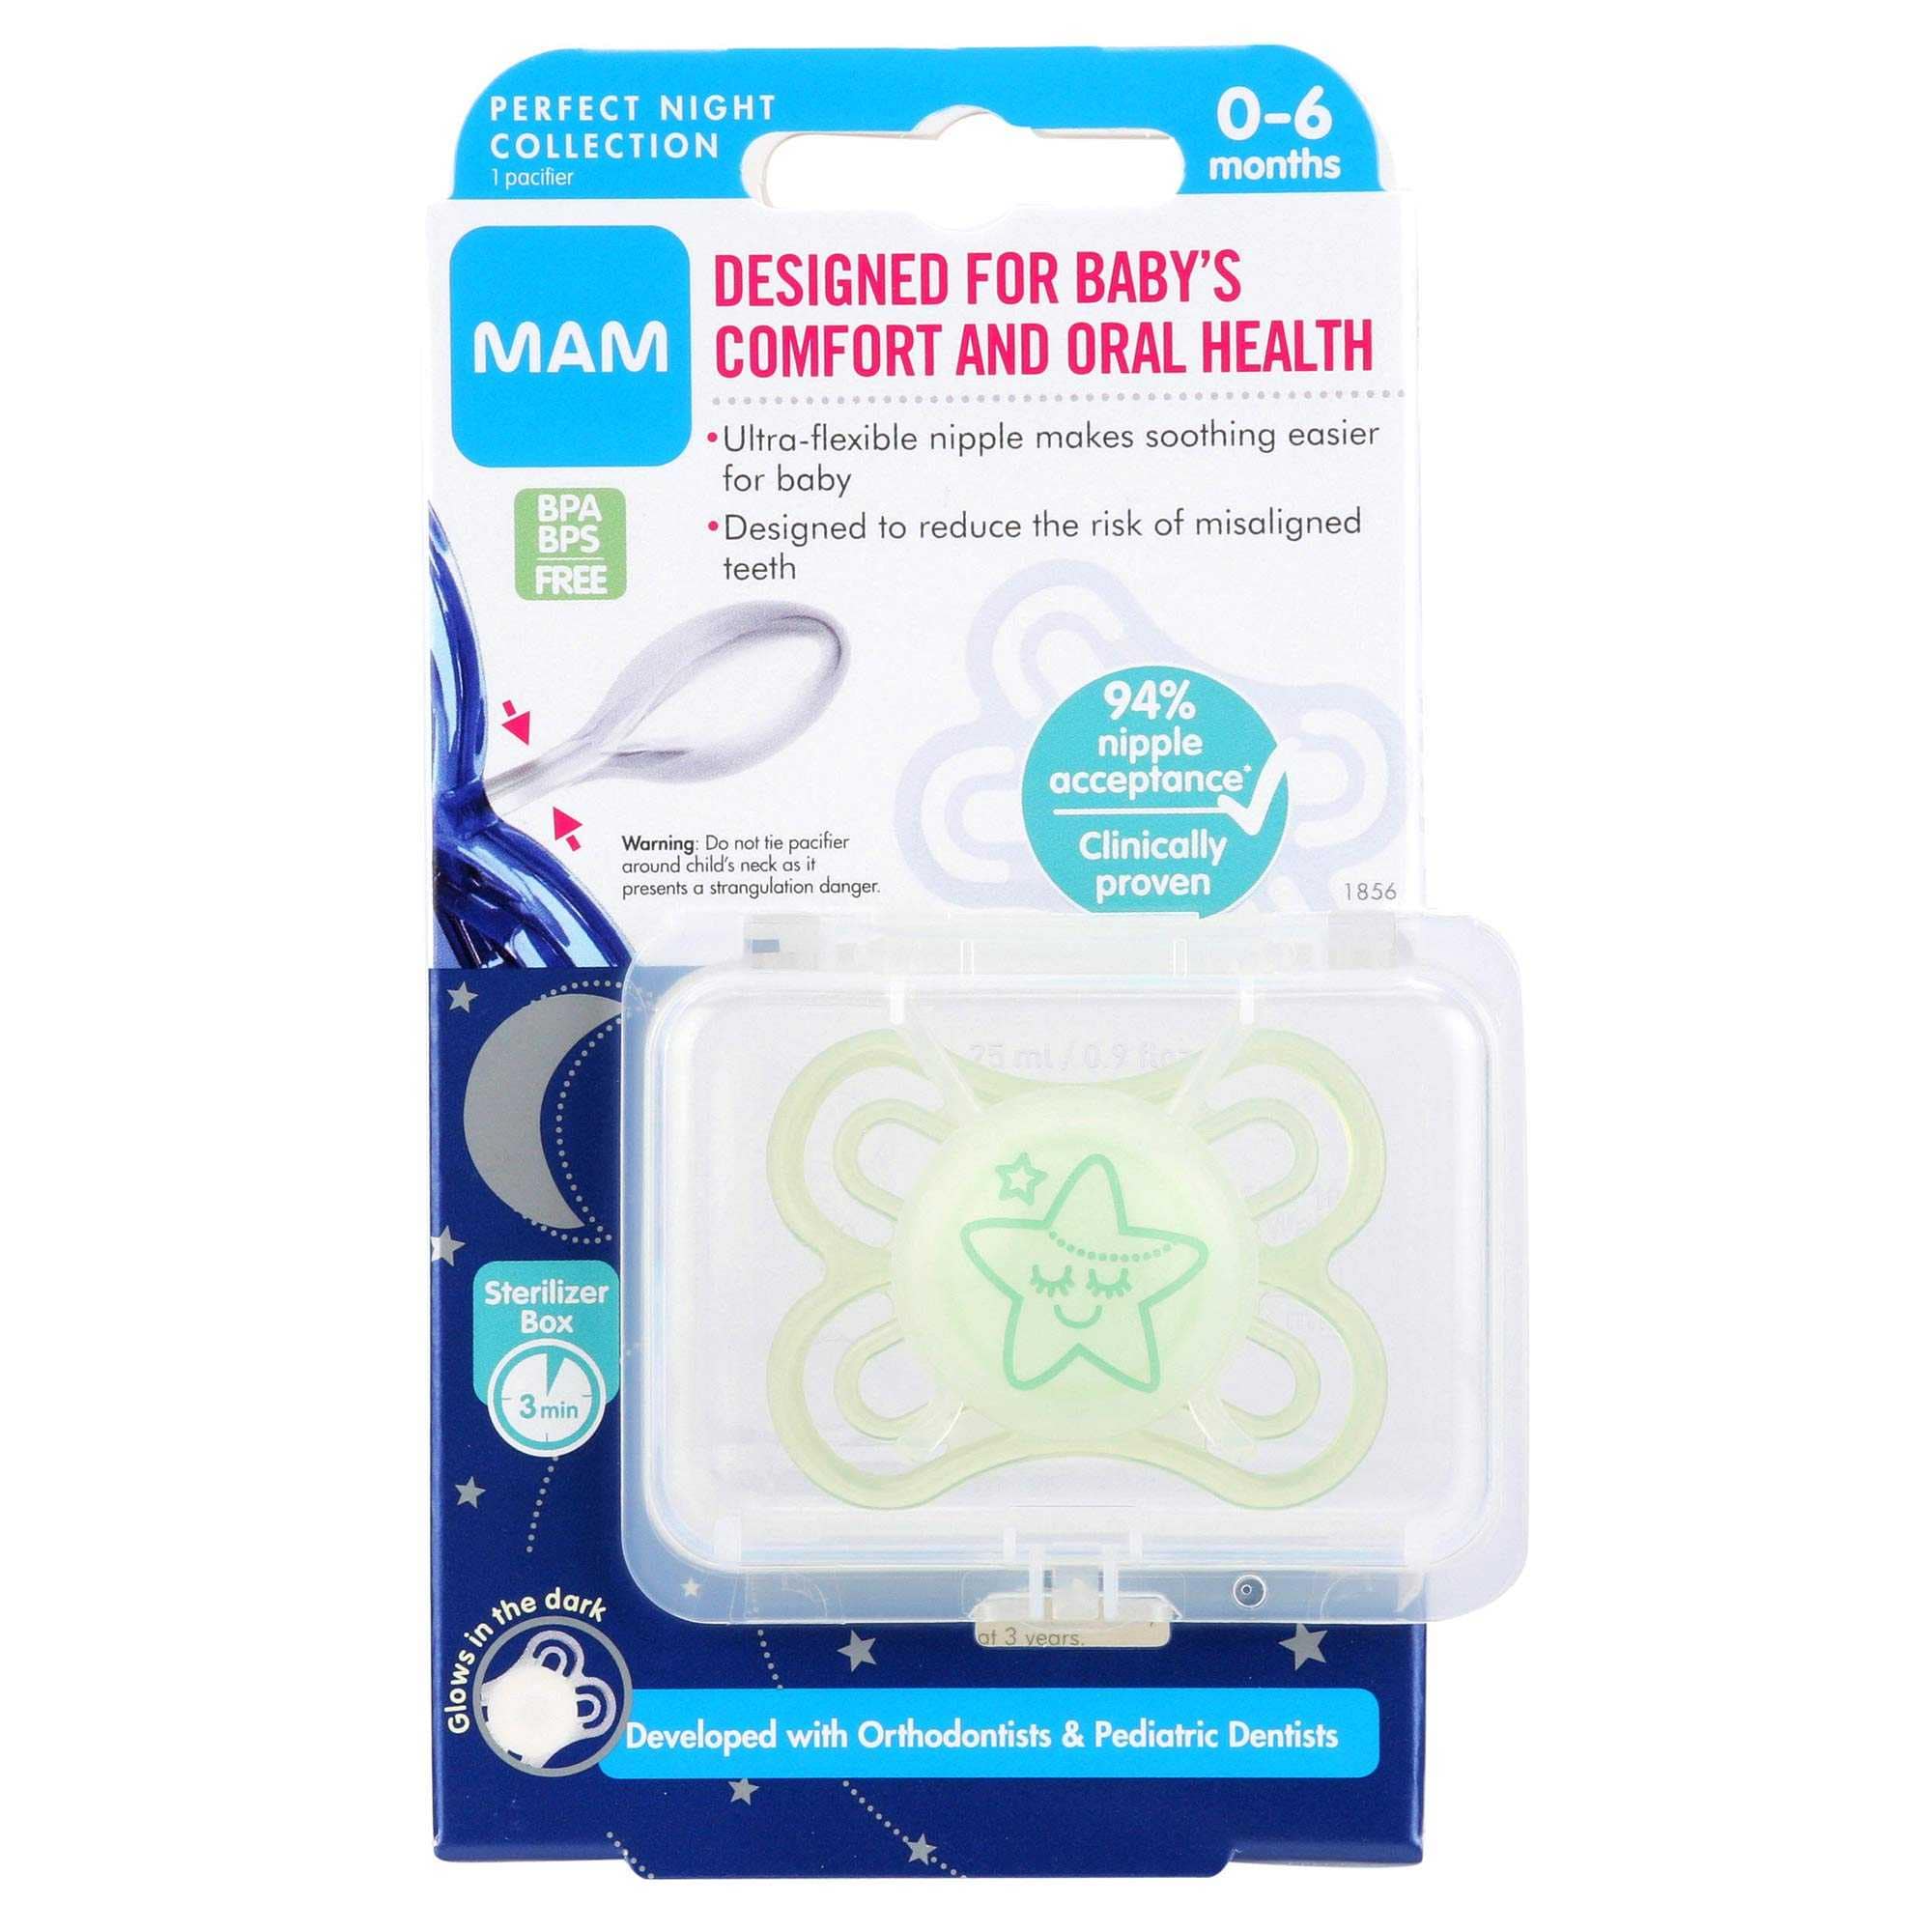 MAM Perfect Night Baby Pacifier, Patented Nipple, Glows in the Dark, 2  Pack, 16+ Months, Blue/Boy,2 Count (Pack of 1)